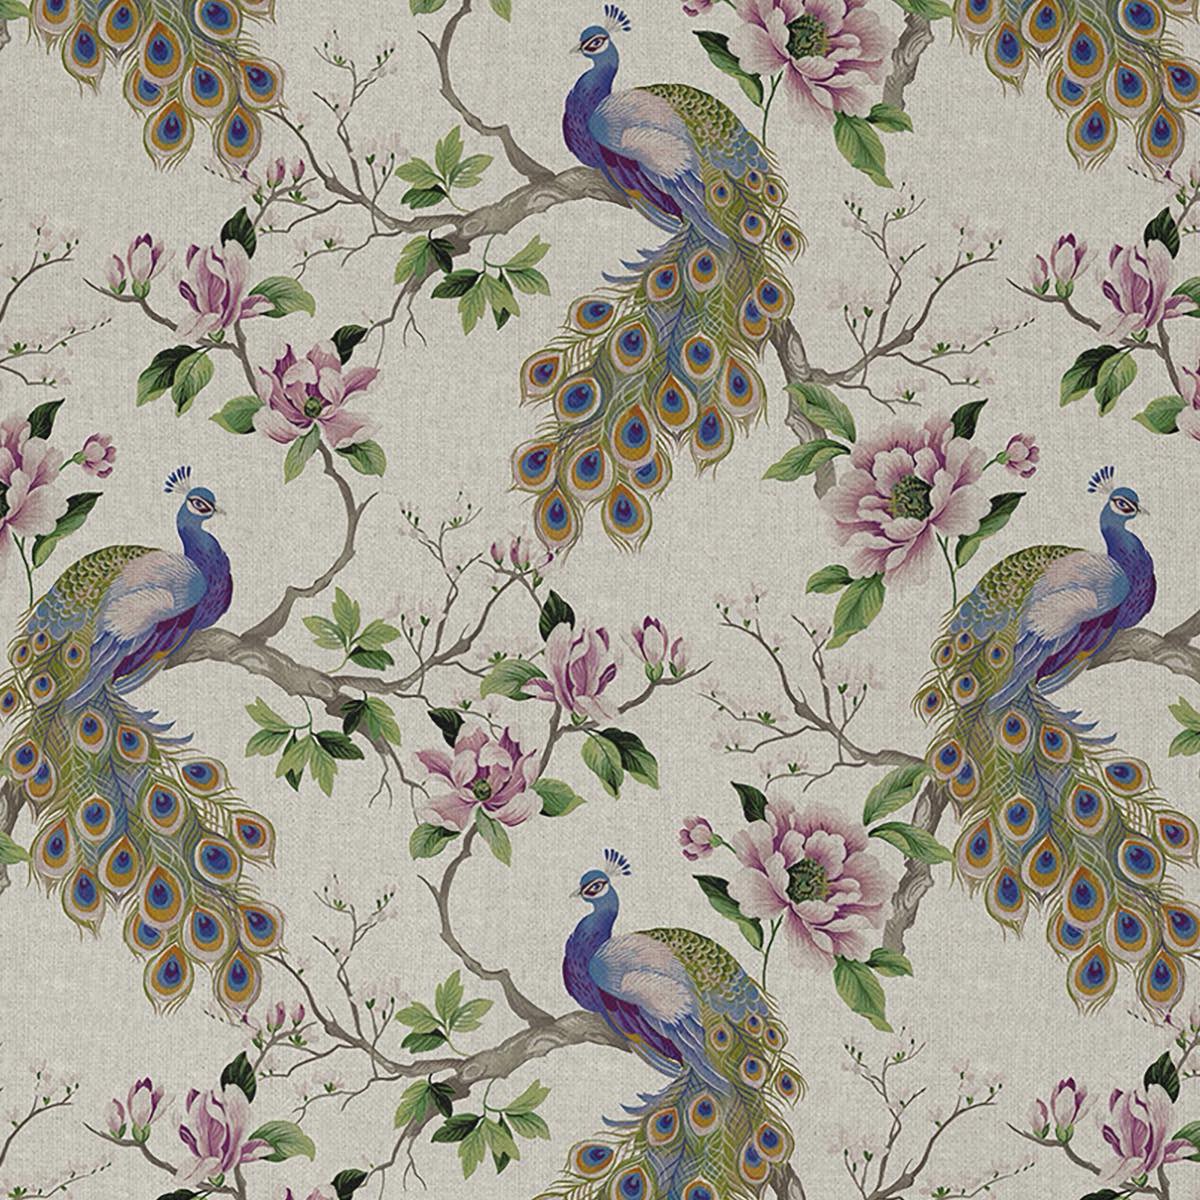 Peacock Garden Showcase Linen Look Fabric
#curtainfabric #canvasfabric #bagfabric #sewingmaterials #fabriconline #sewingfabric #theremnanthouse #craftfabric #homesewing
remnanthousefabric.co.uk/product/peacoc…